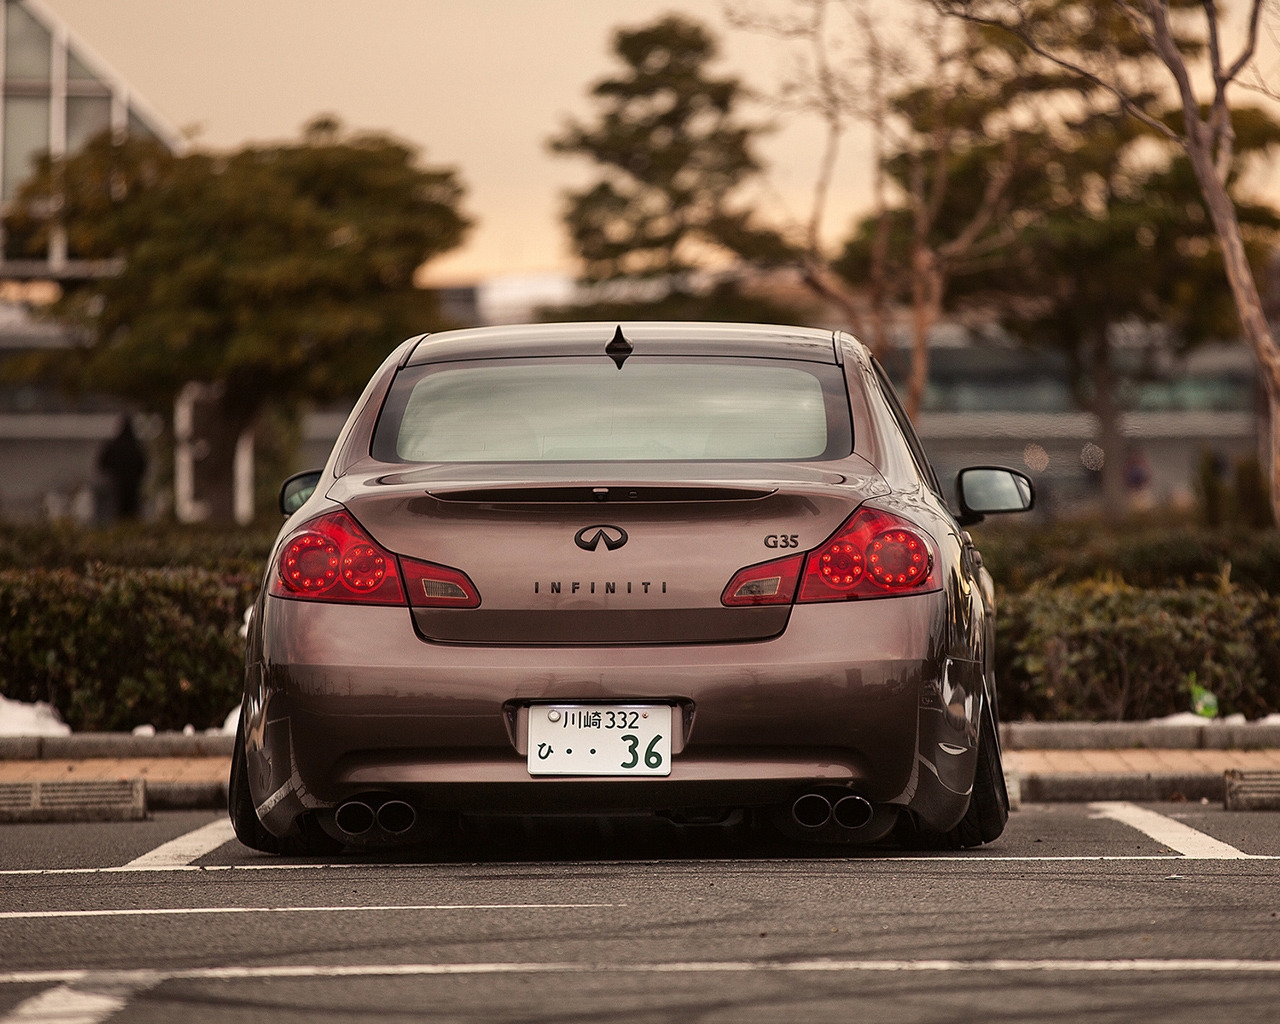 Tuned G35 Infiniti for 1280 x 1024 resolution